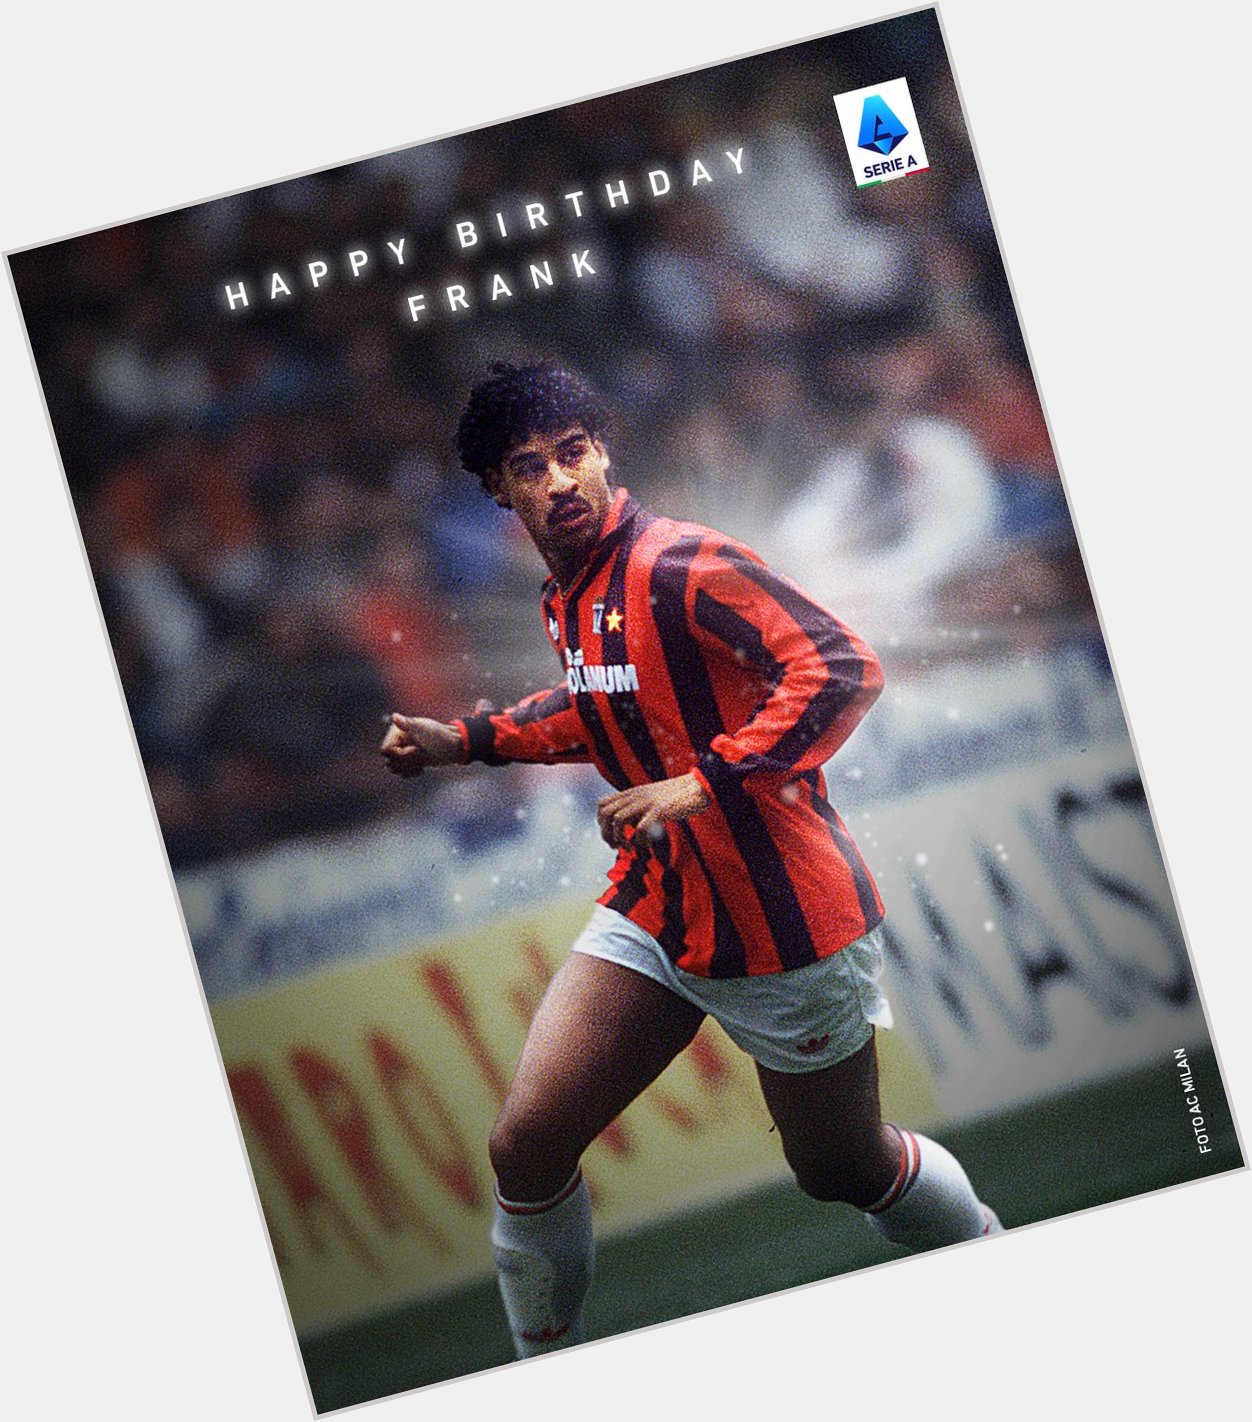 You could find him everywhere on the pitch.  Happy birthday Frank Rijkaard!     